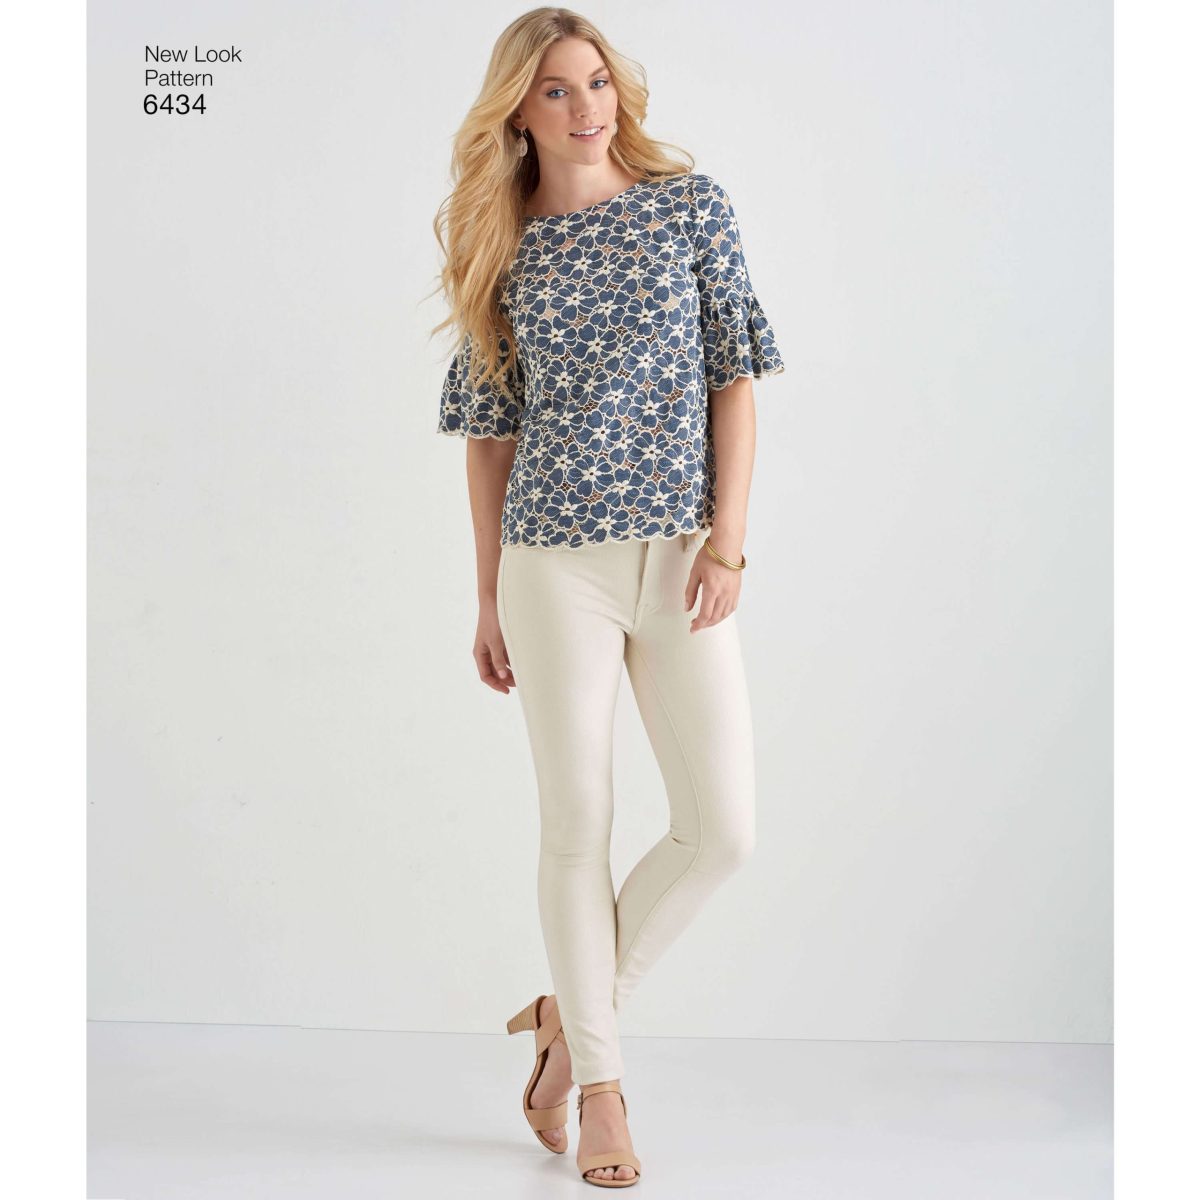 New Look Sewing Pattern N6434 Misses' Tops with Fabric Variations